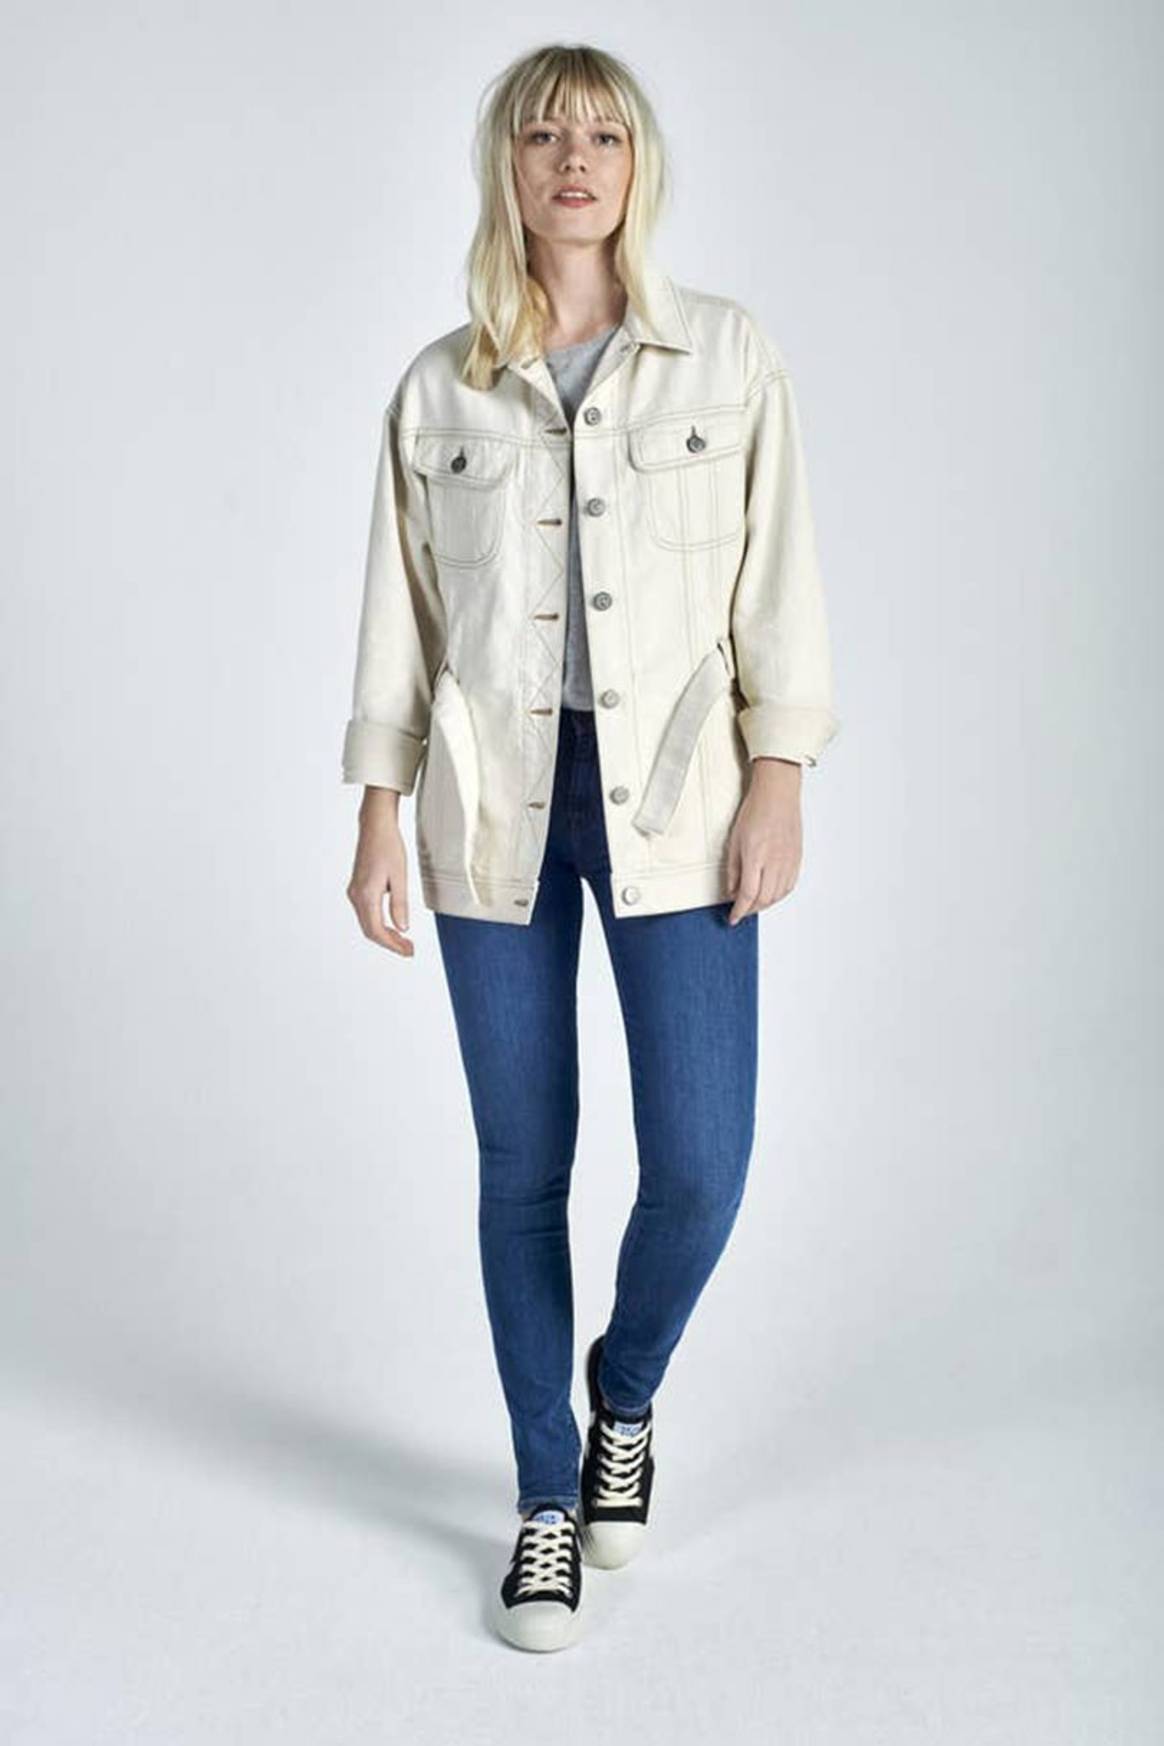 Lee Jeans launches fully biodegradable denim capsule collection